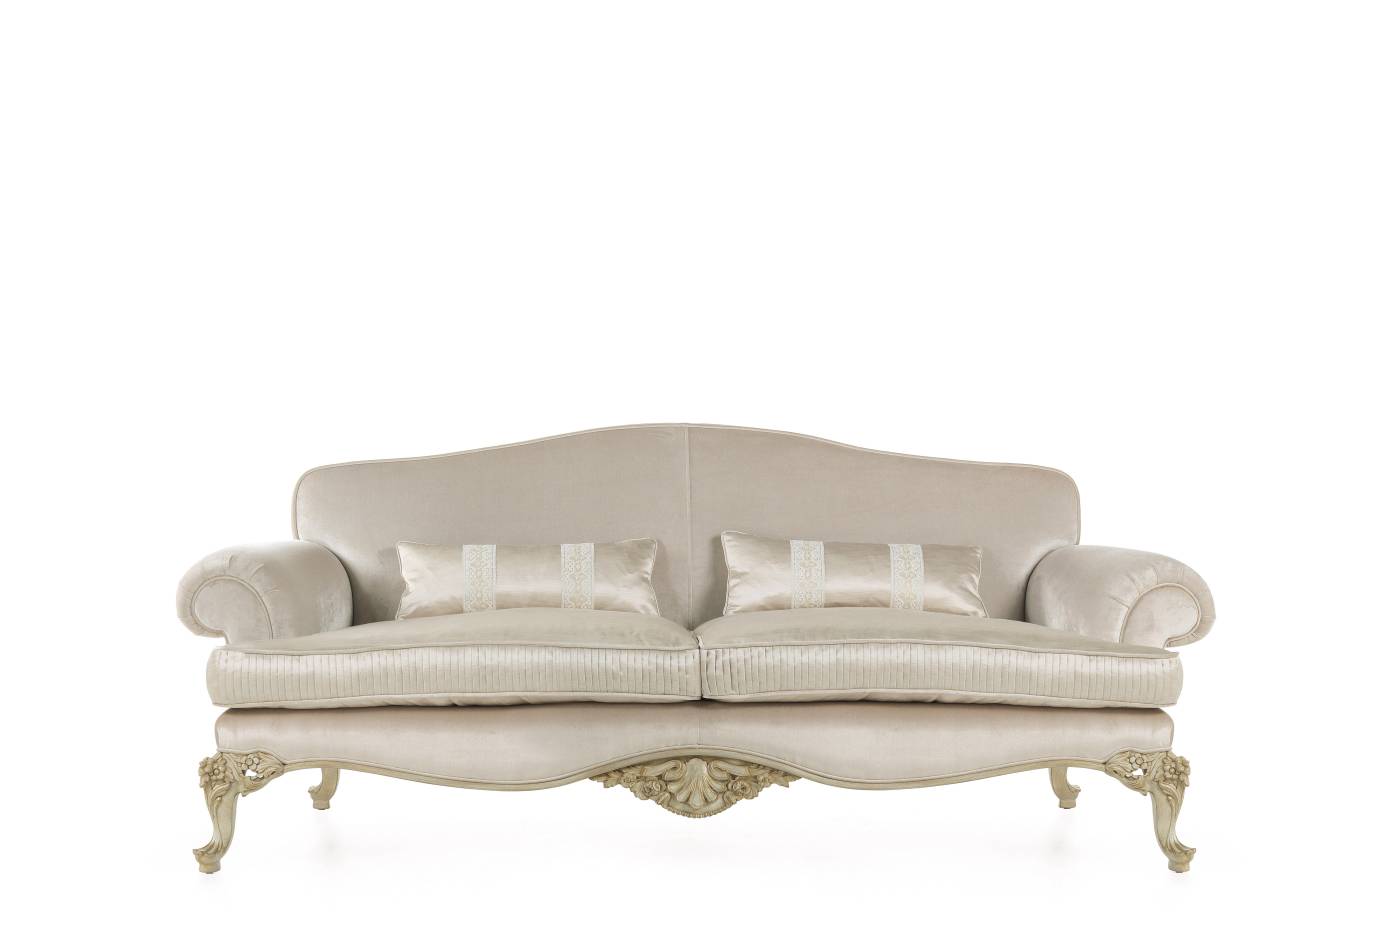 LA GRANDE DAME 2-seater sofa - 3-seater sofa - A luxury experience with the Domus collection and its classic luxurious furniture